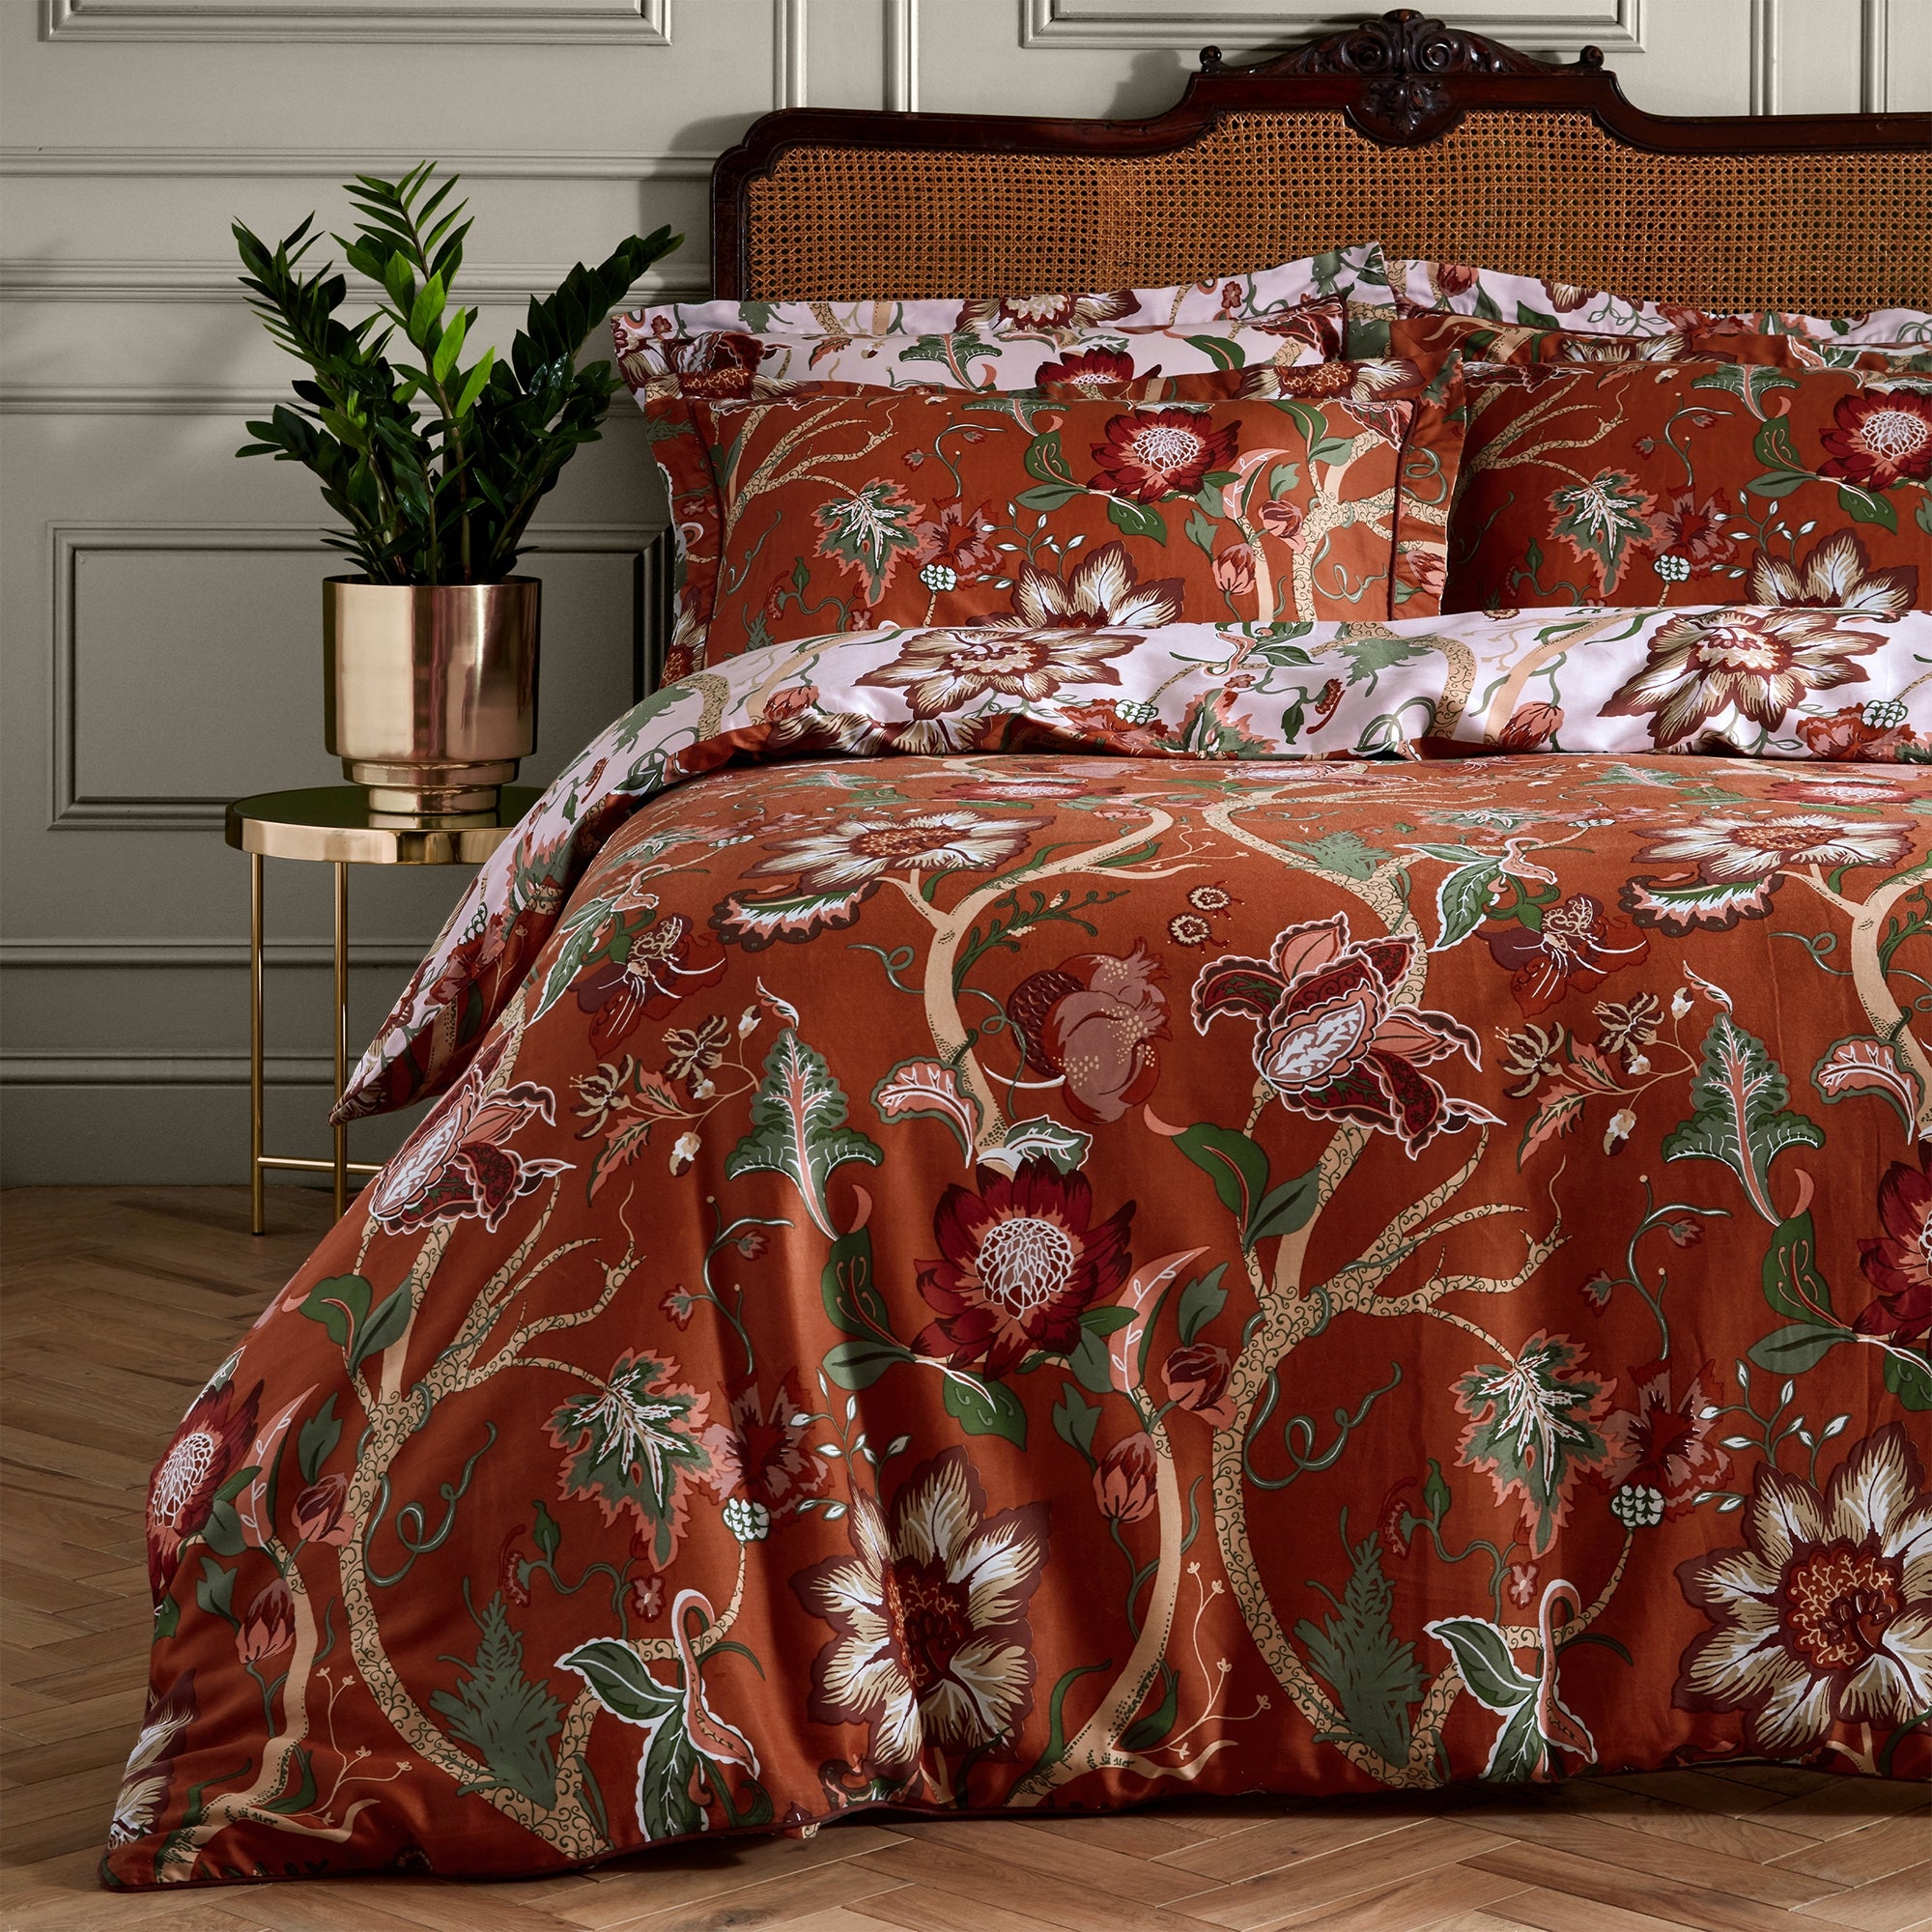 Paoletti Botanist Rust 100 Cotton Reversible Duvet Cover And Pillowcase Set Red